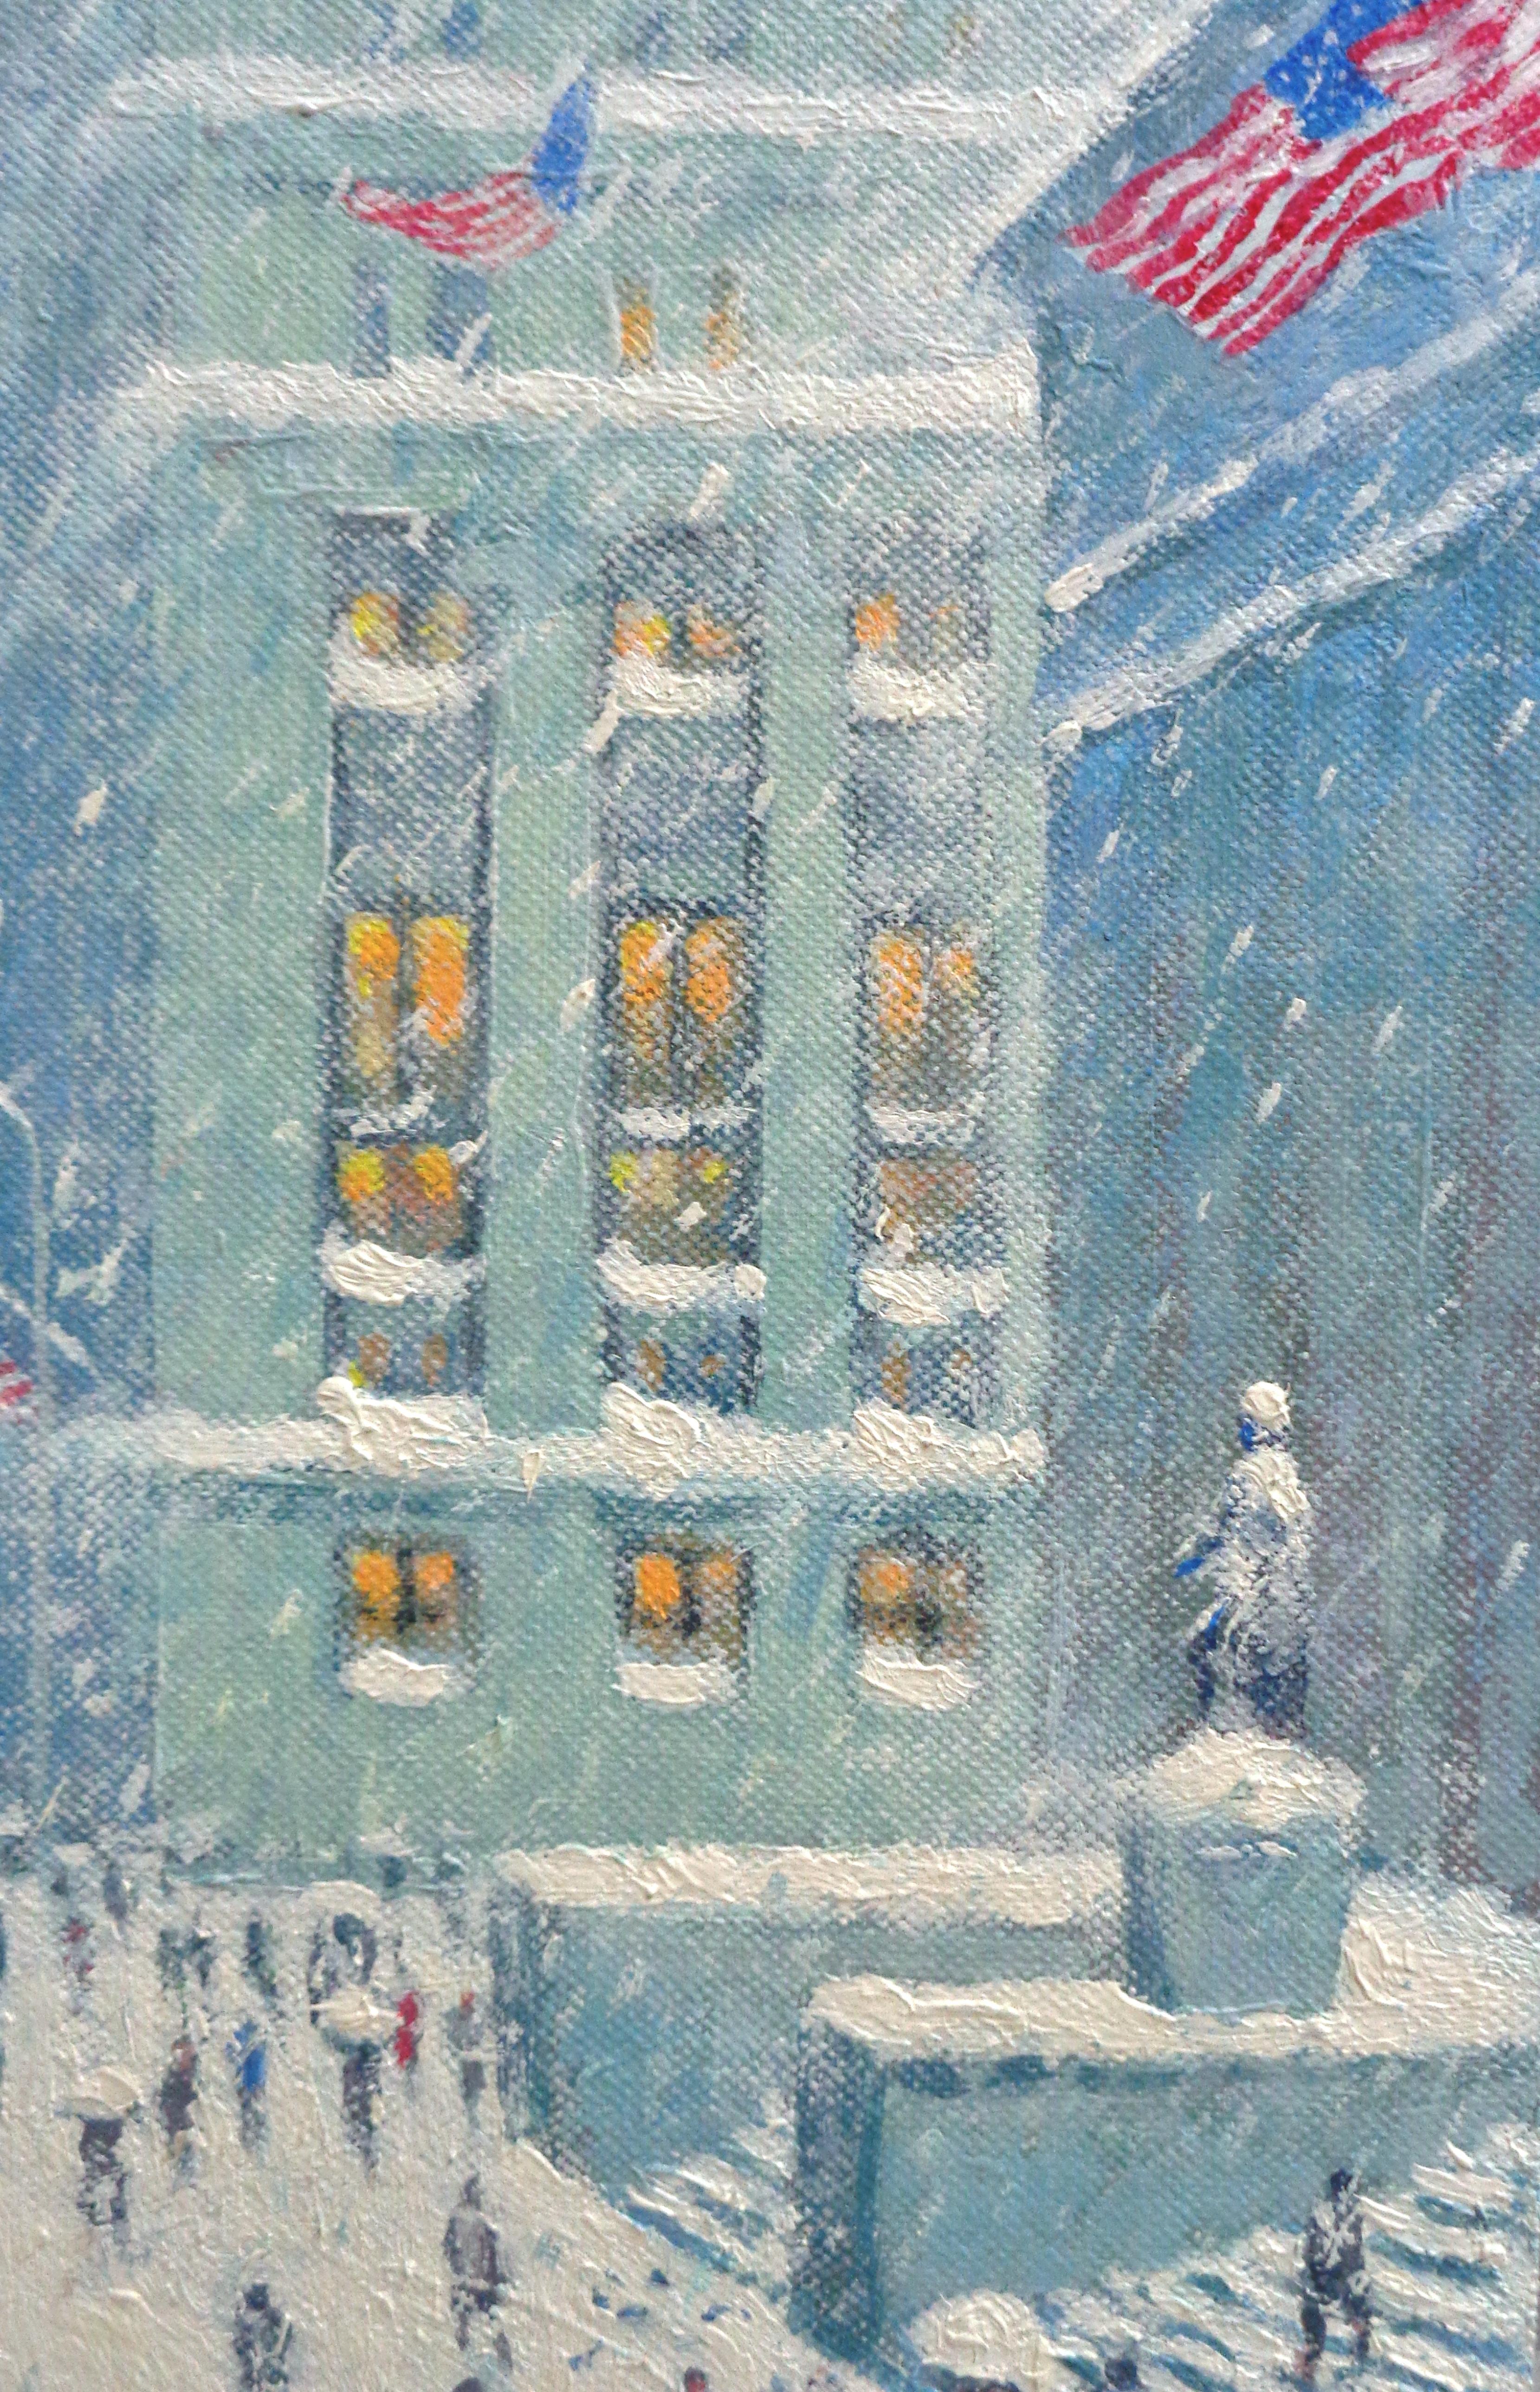  New York City Winter Wall Street Flags Oil Painting by Michael Budden 3